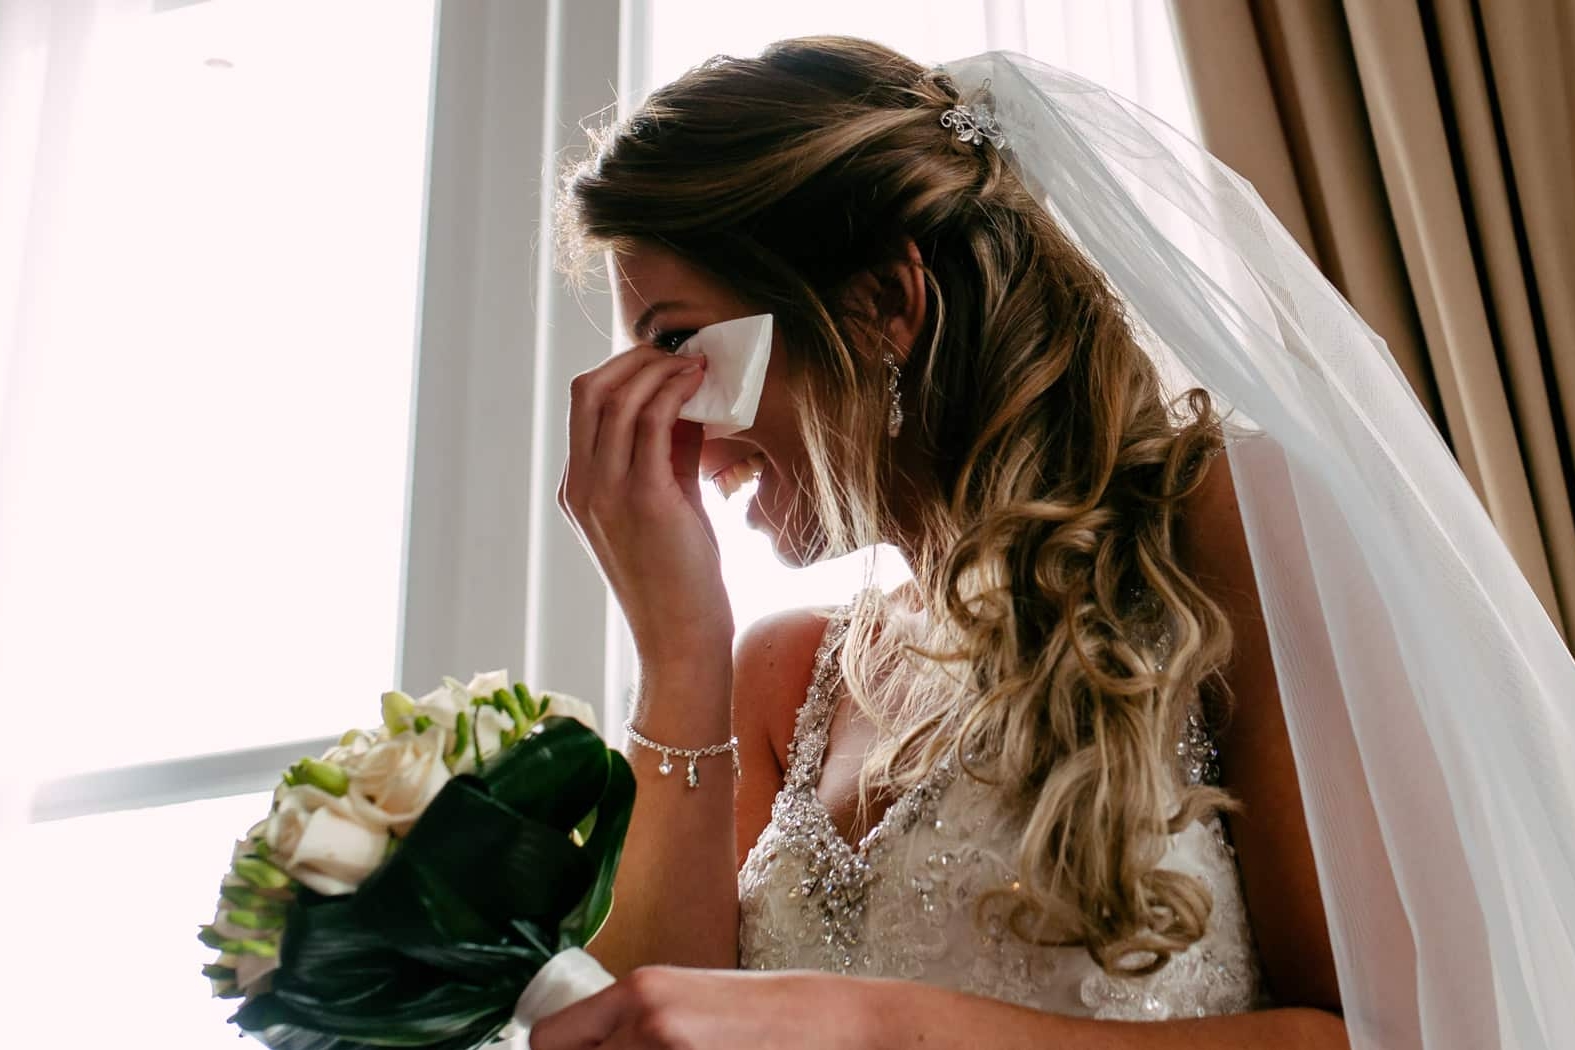 A bride in wedding dress wiping her eyes with a tissue during wedding vows.